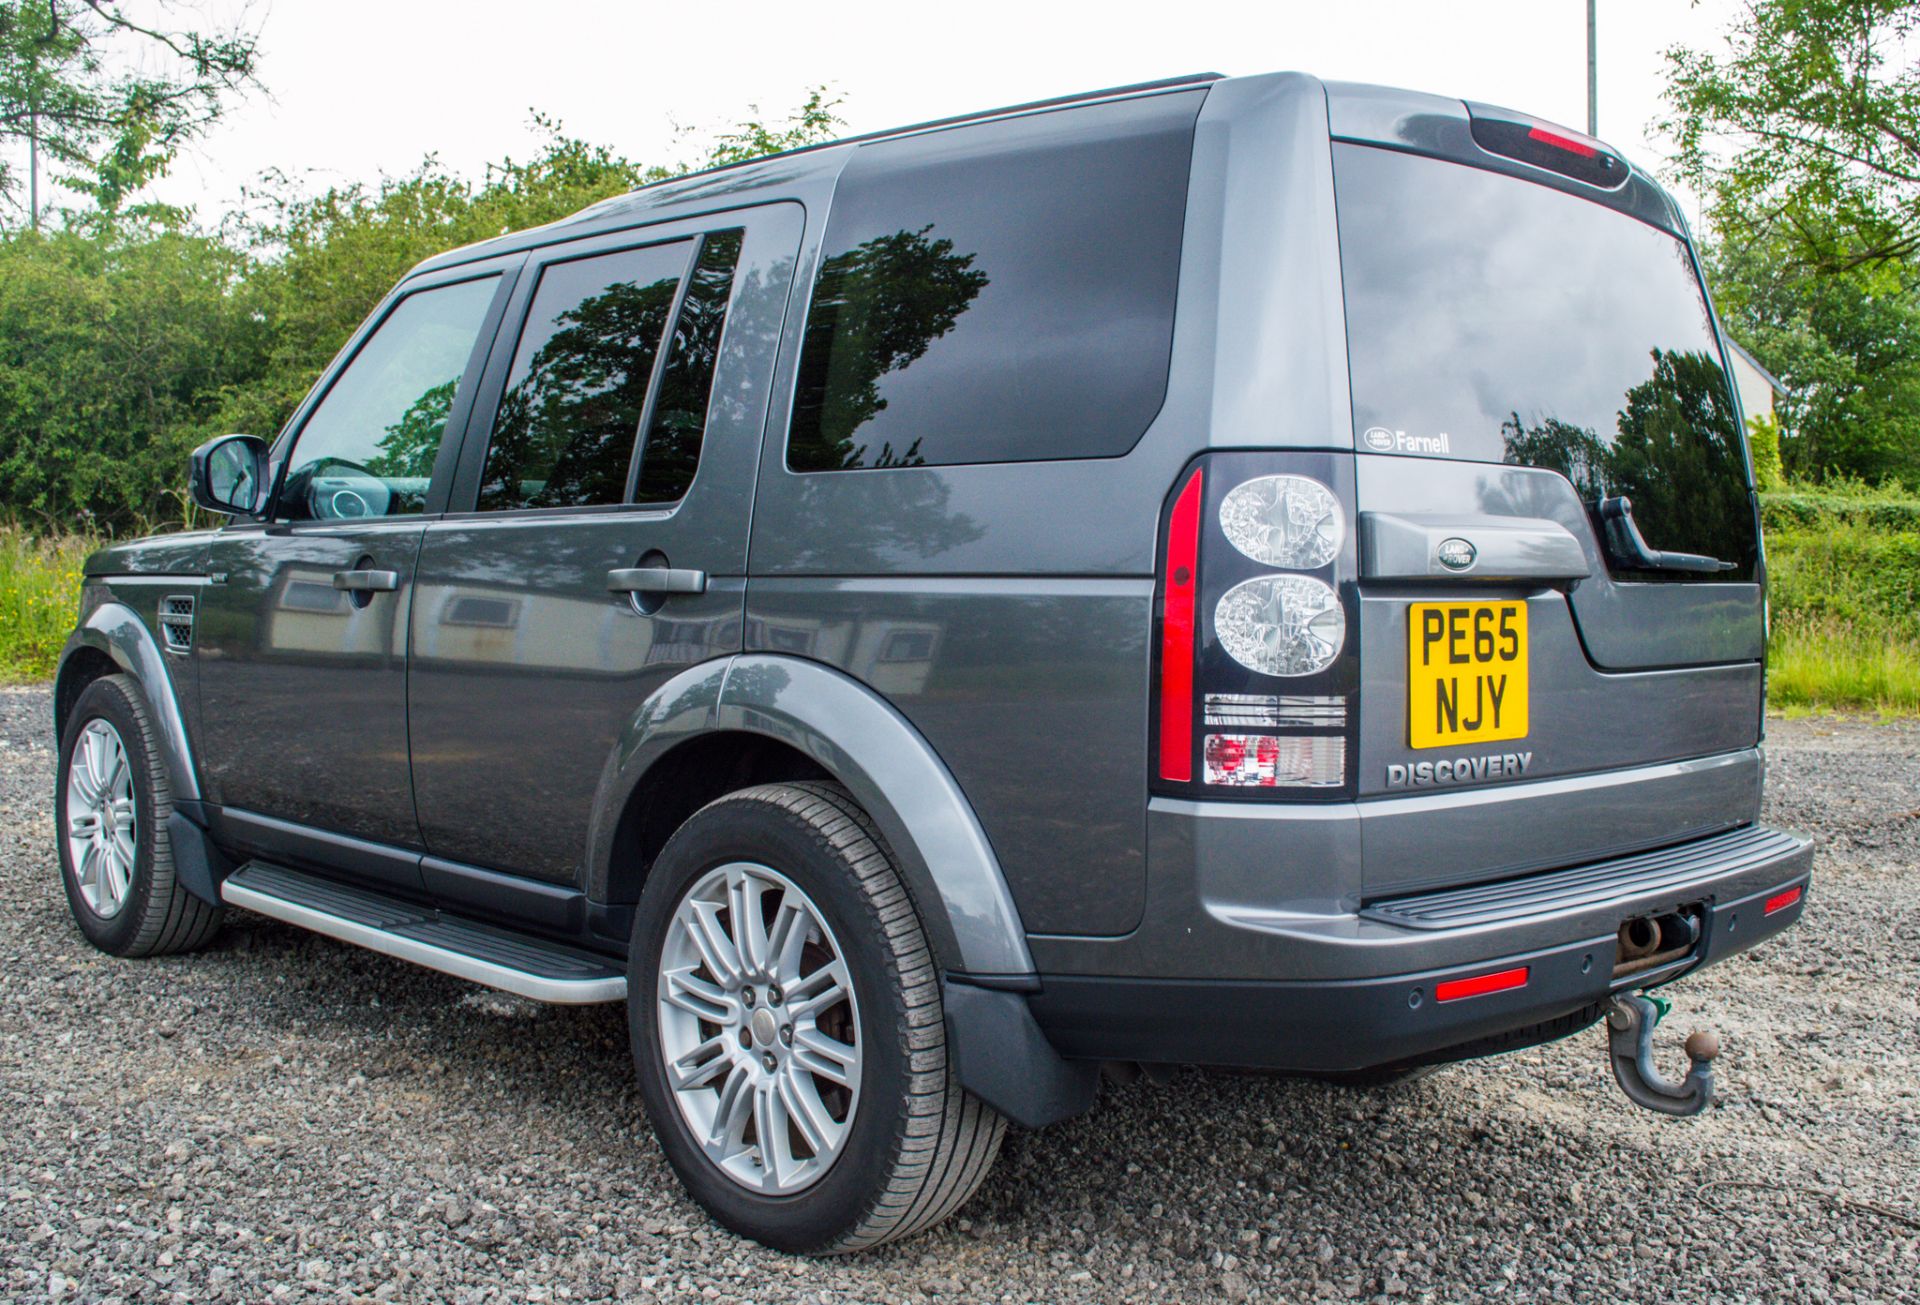 Land Rover Discovery 4 SE 3.0 TDV6 Commercial 4 wheel drive utility vehicle  Reg No: PE 65 NJY  Date - Image 4 of 23